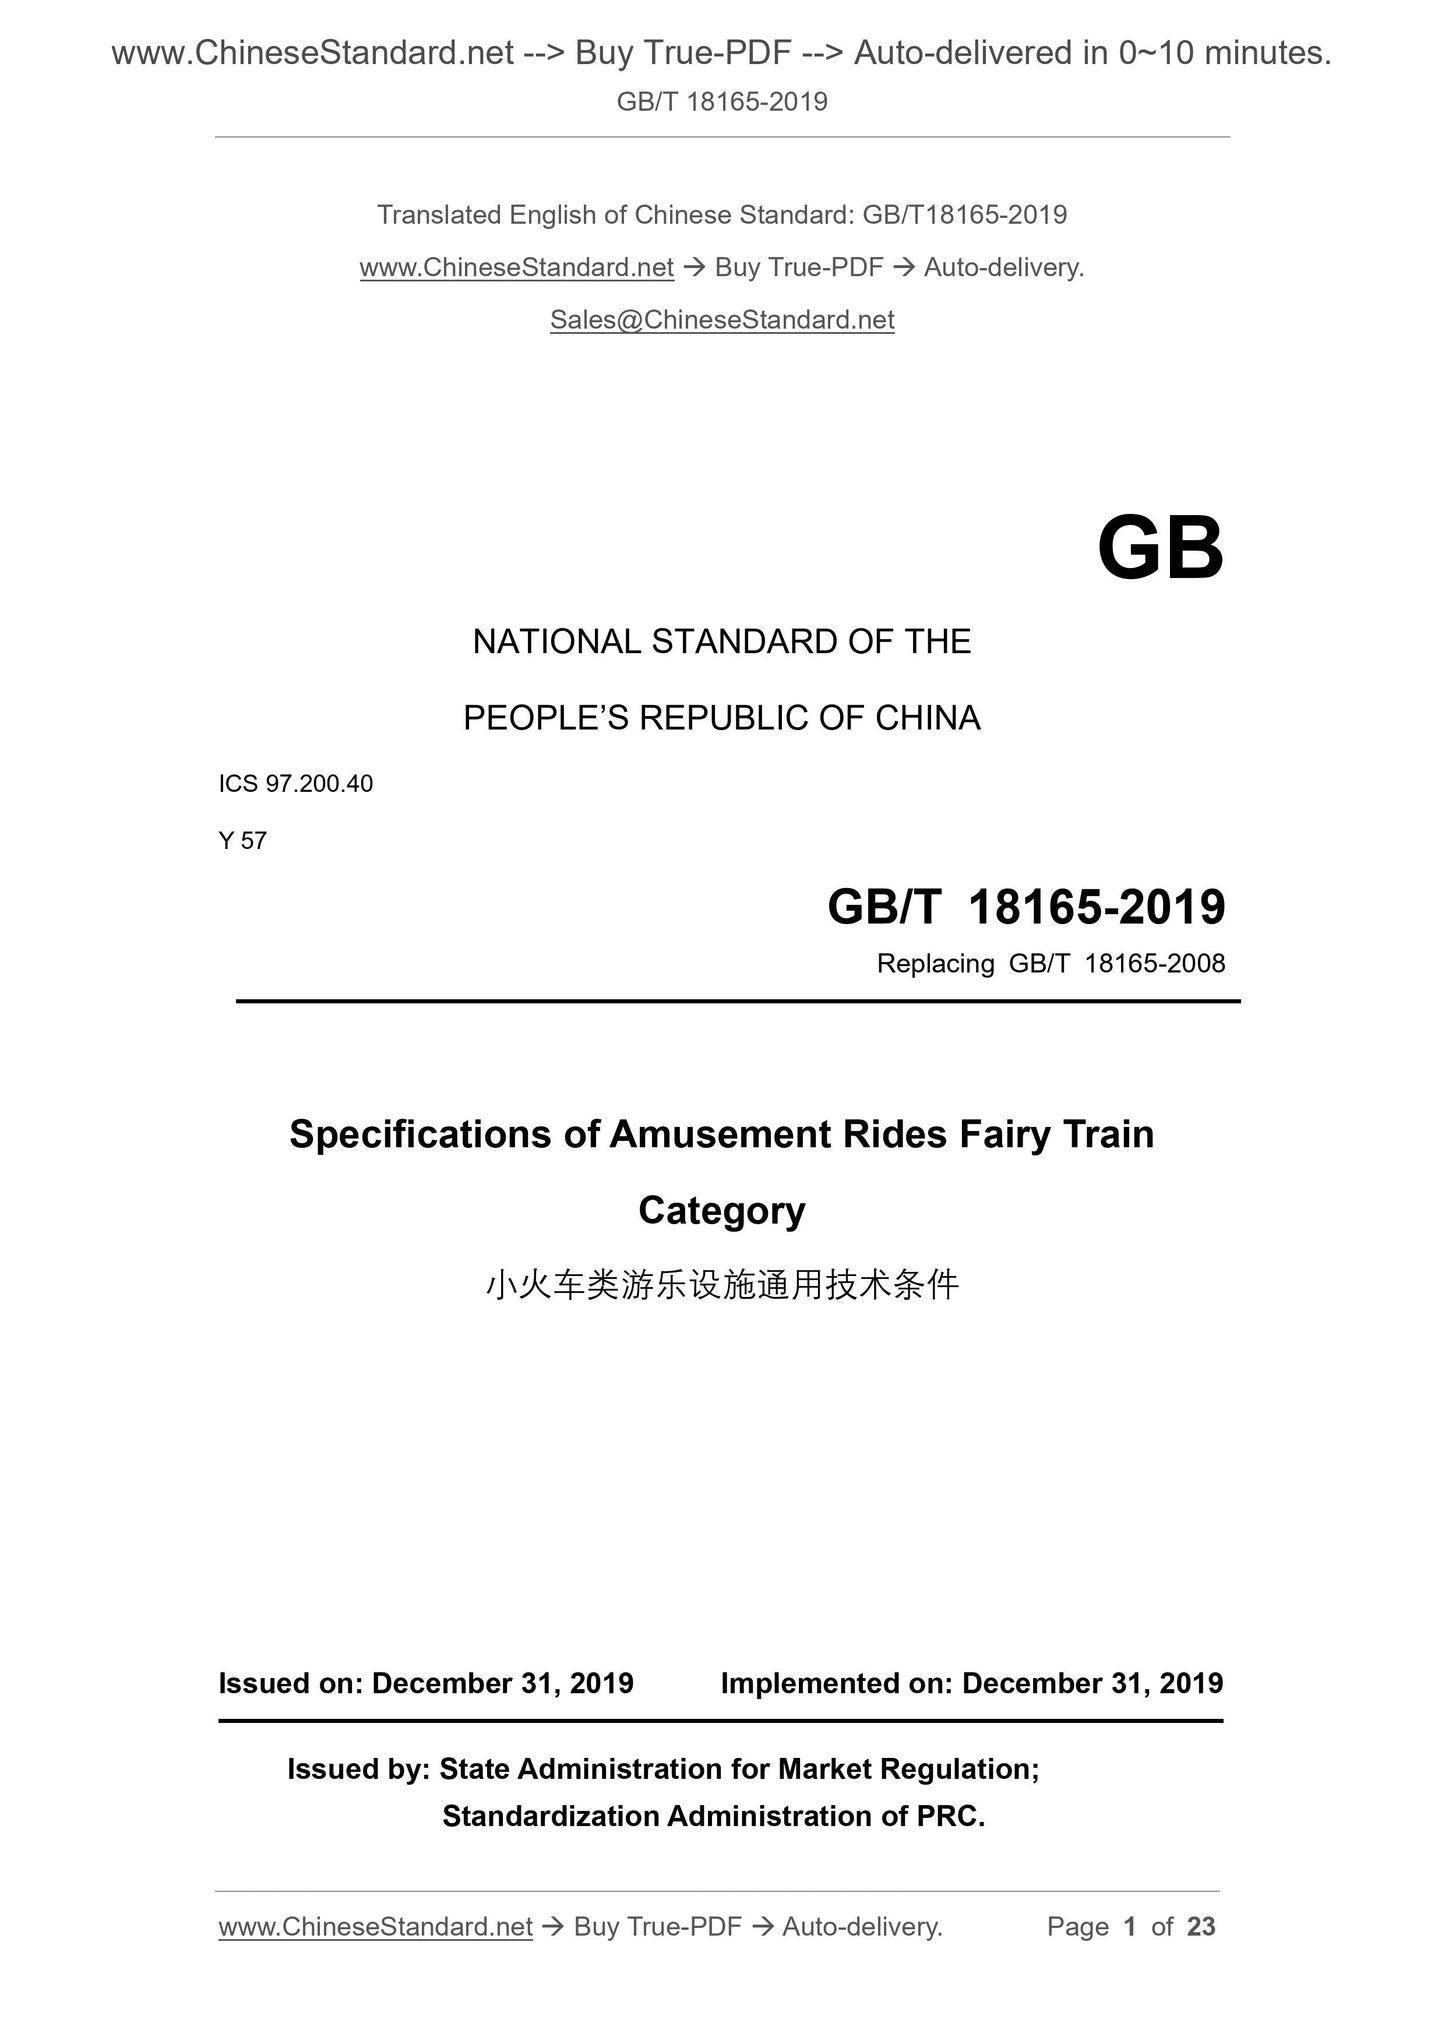 GB/T 18165-2019 Page 1